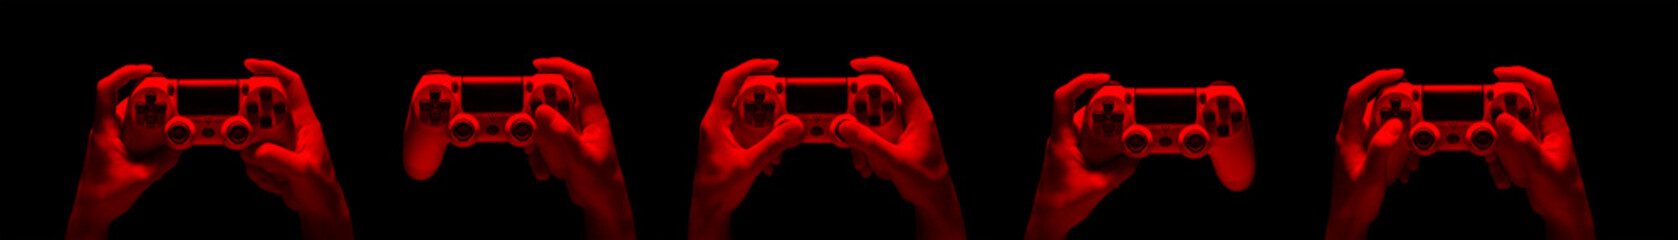 Hyman hands holding video game gamepad in neon lights isolated on a black